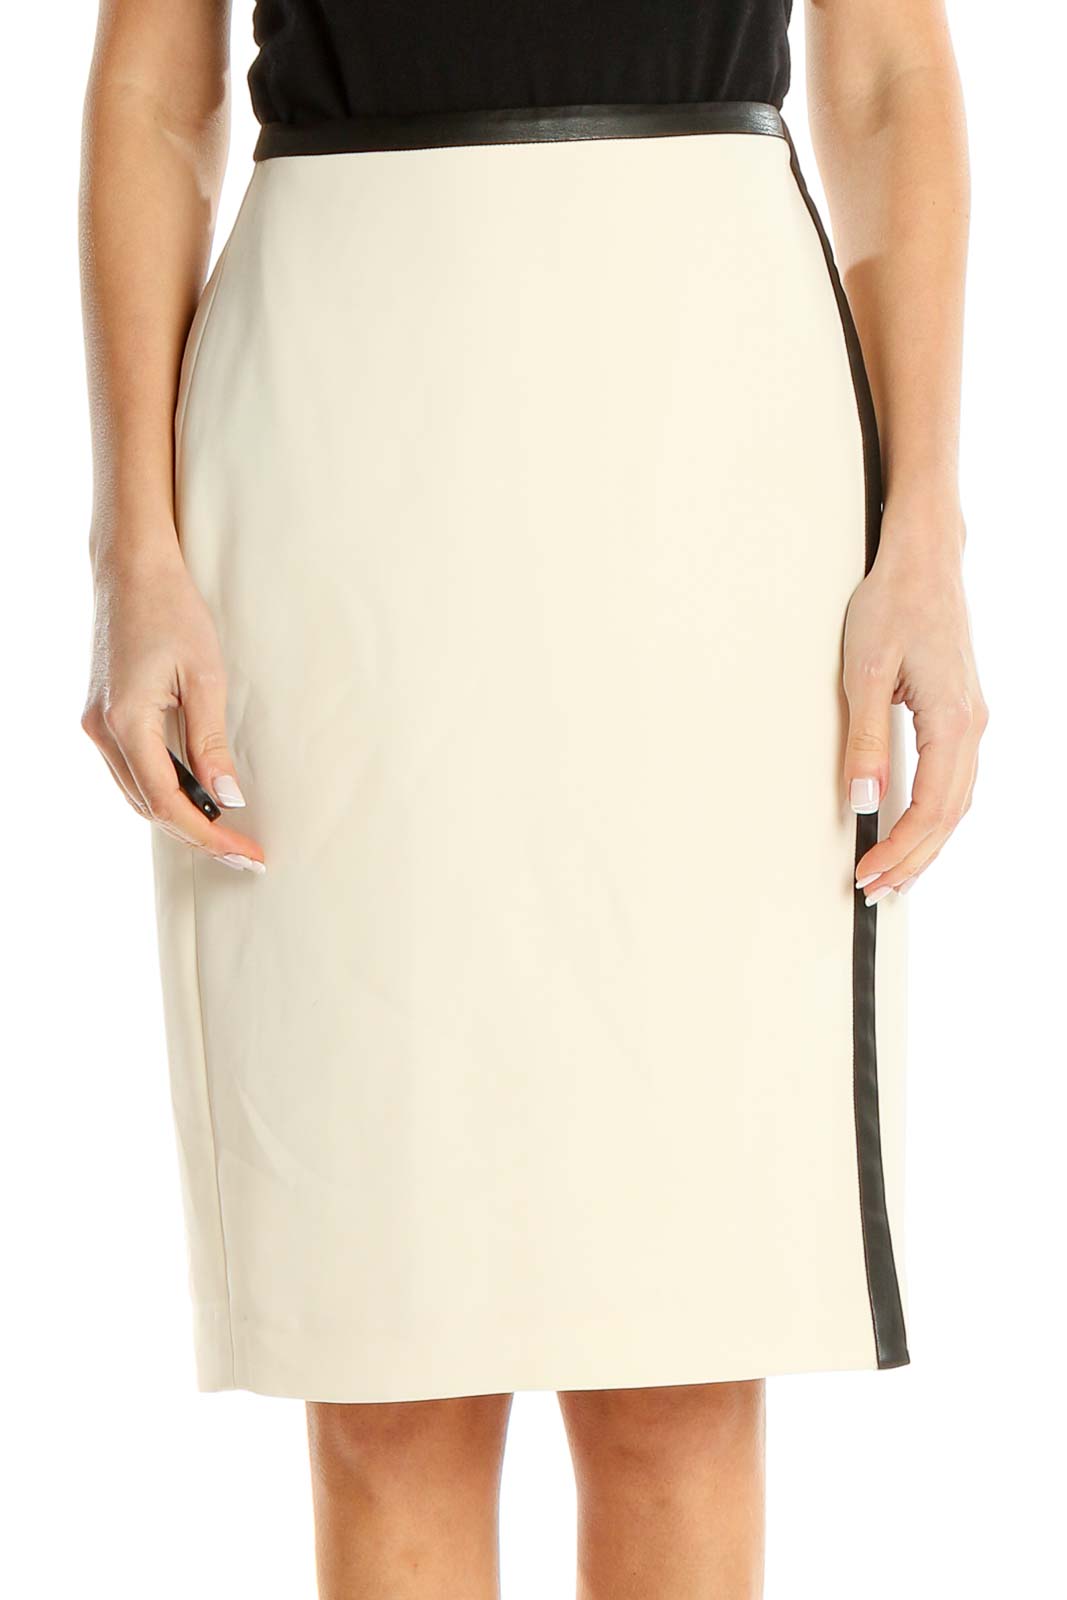 Leather Trim White Classic Pencil Skirt Front